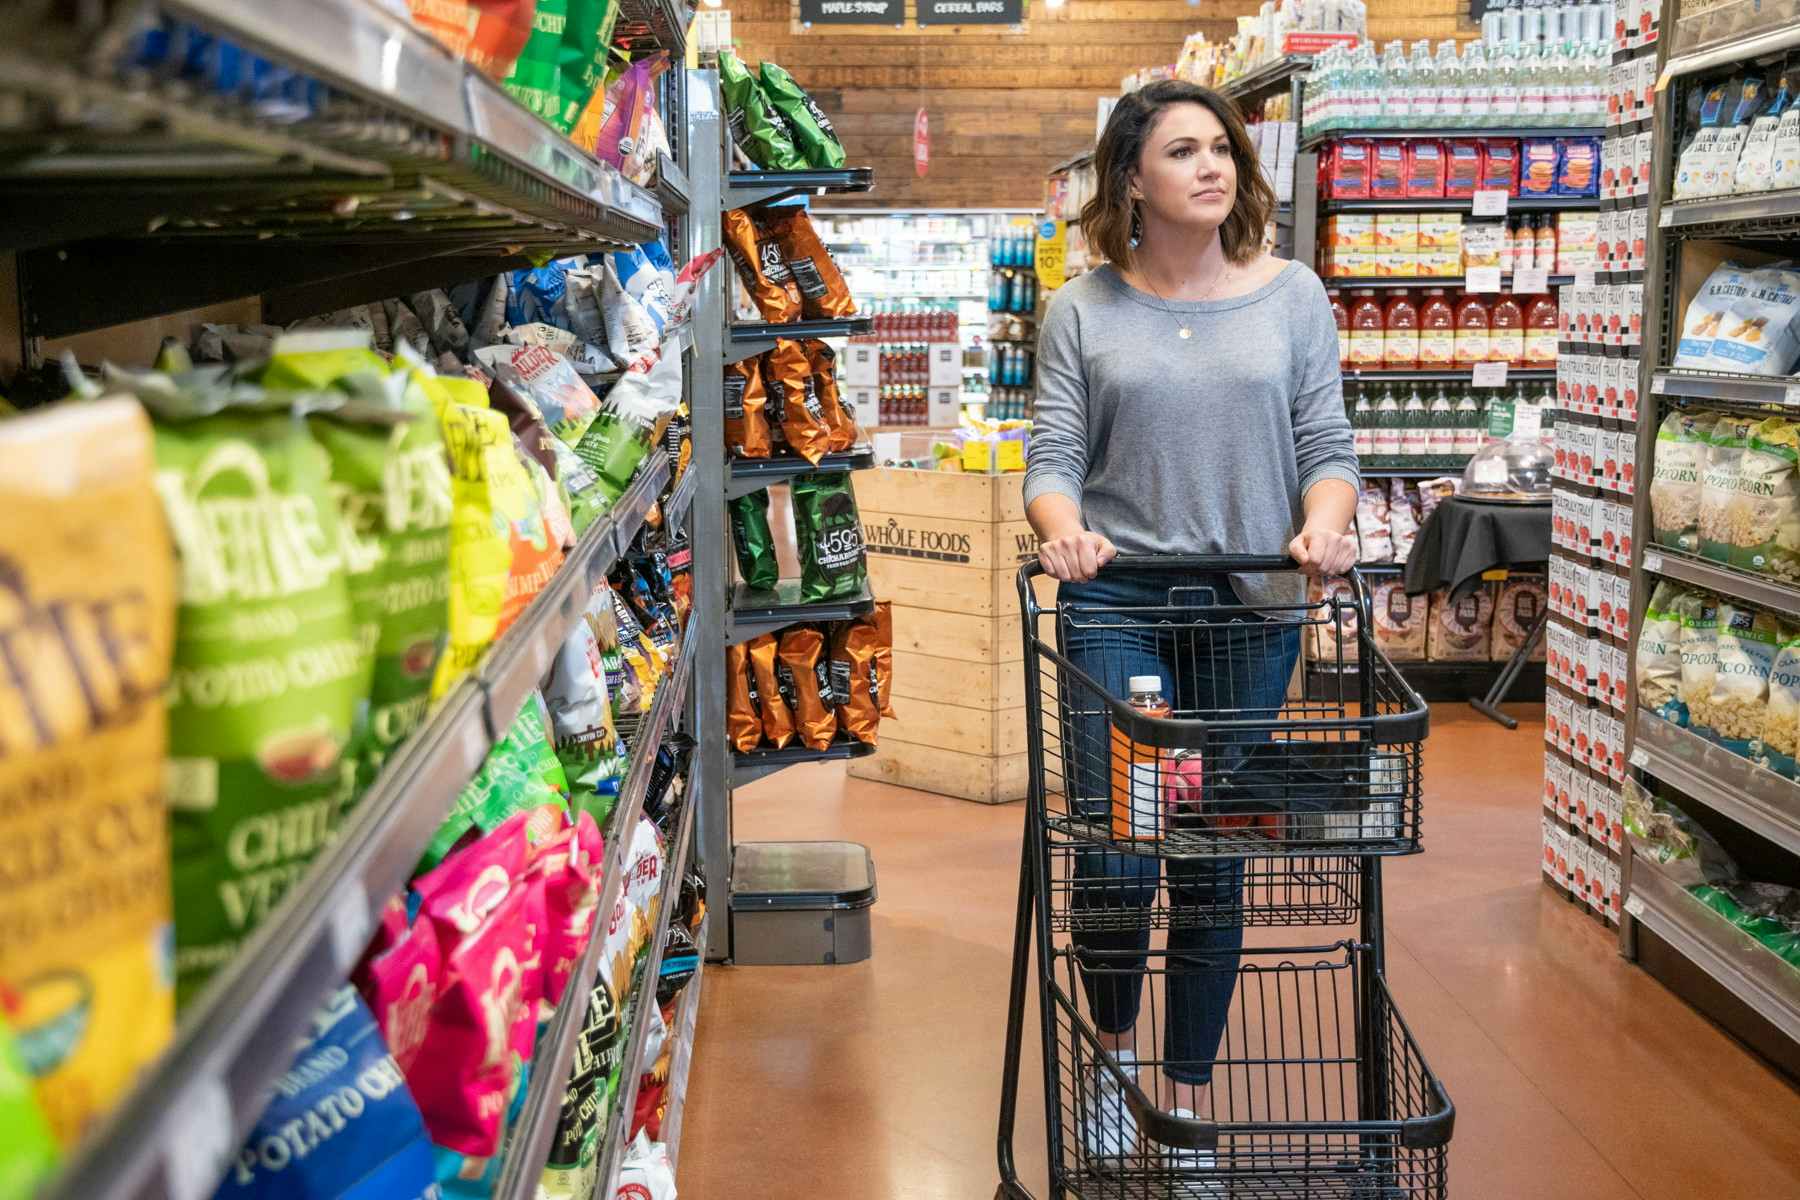 A woman pushing a shopping cart down an aisle at Whole Foods.